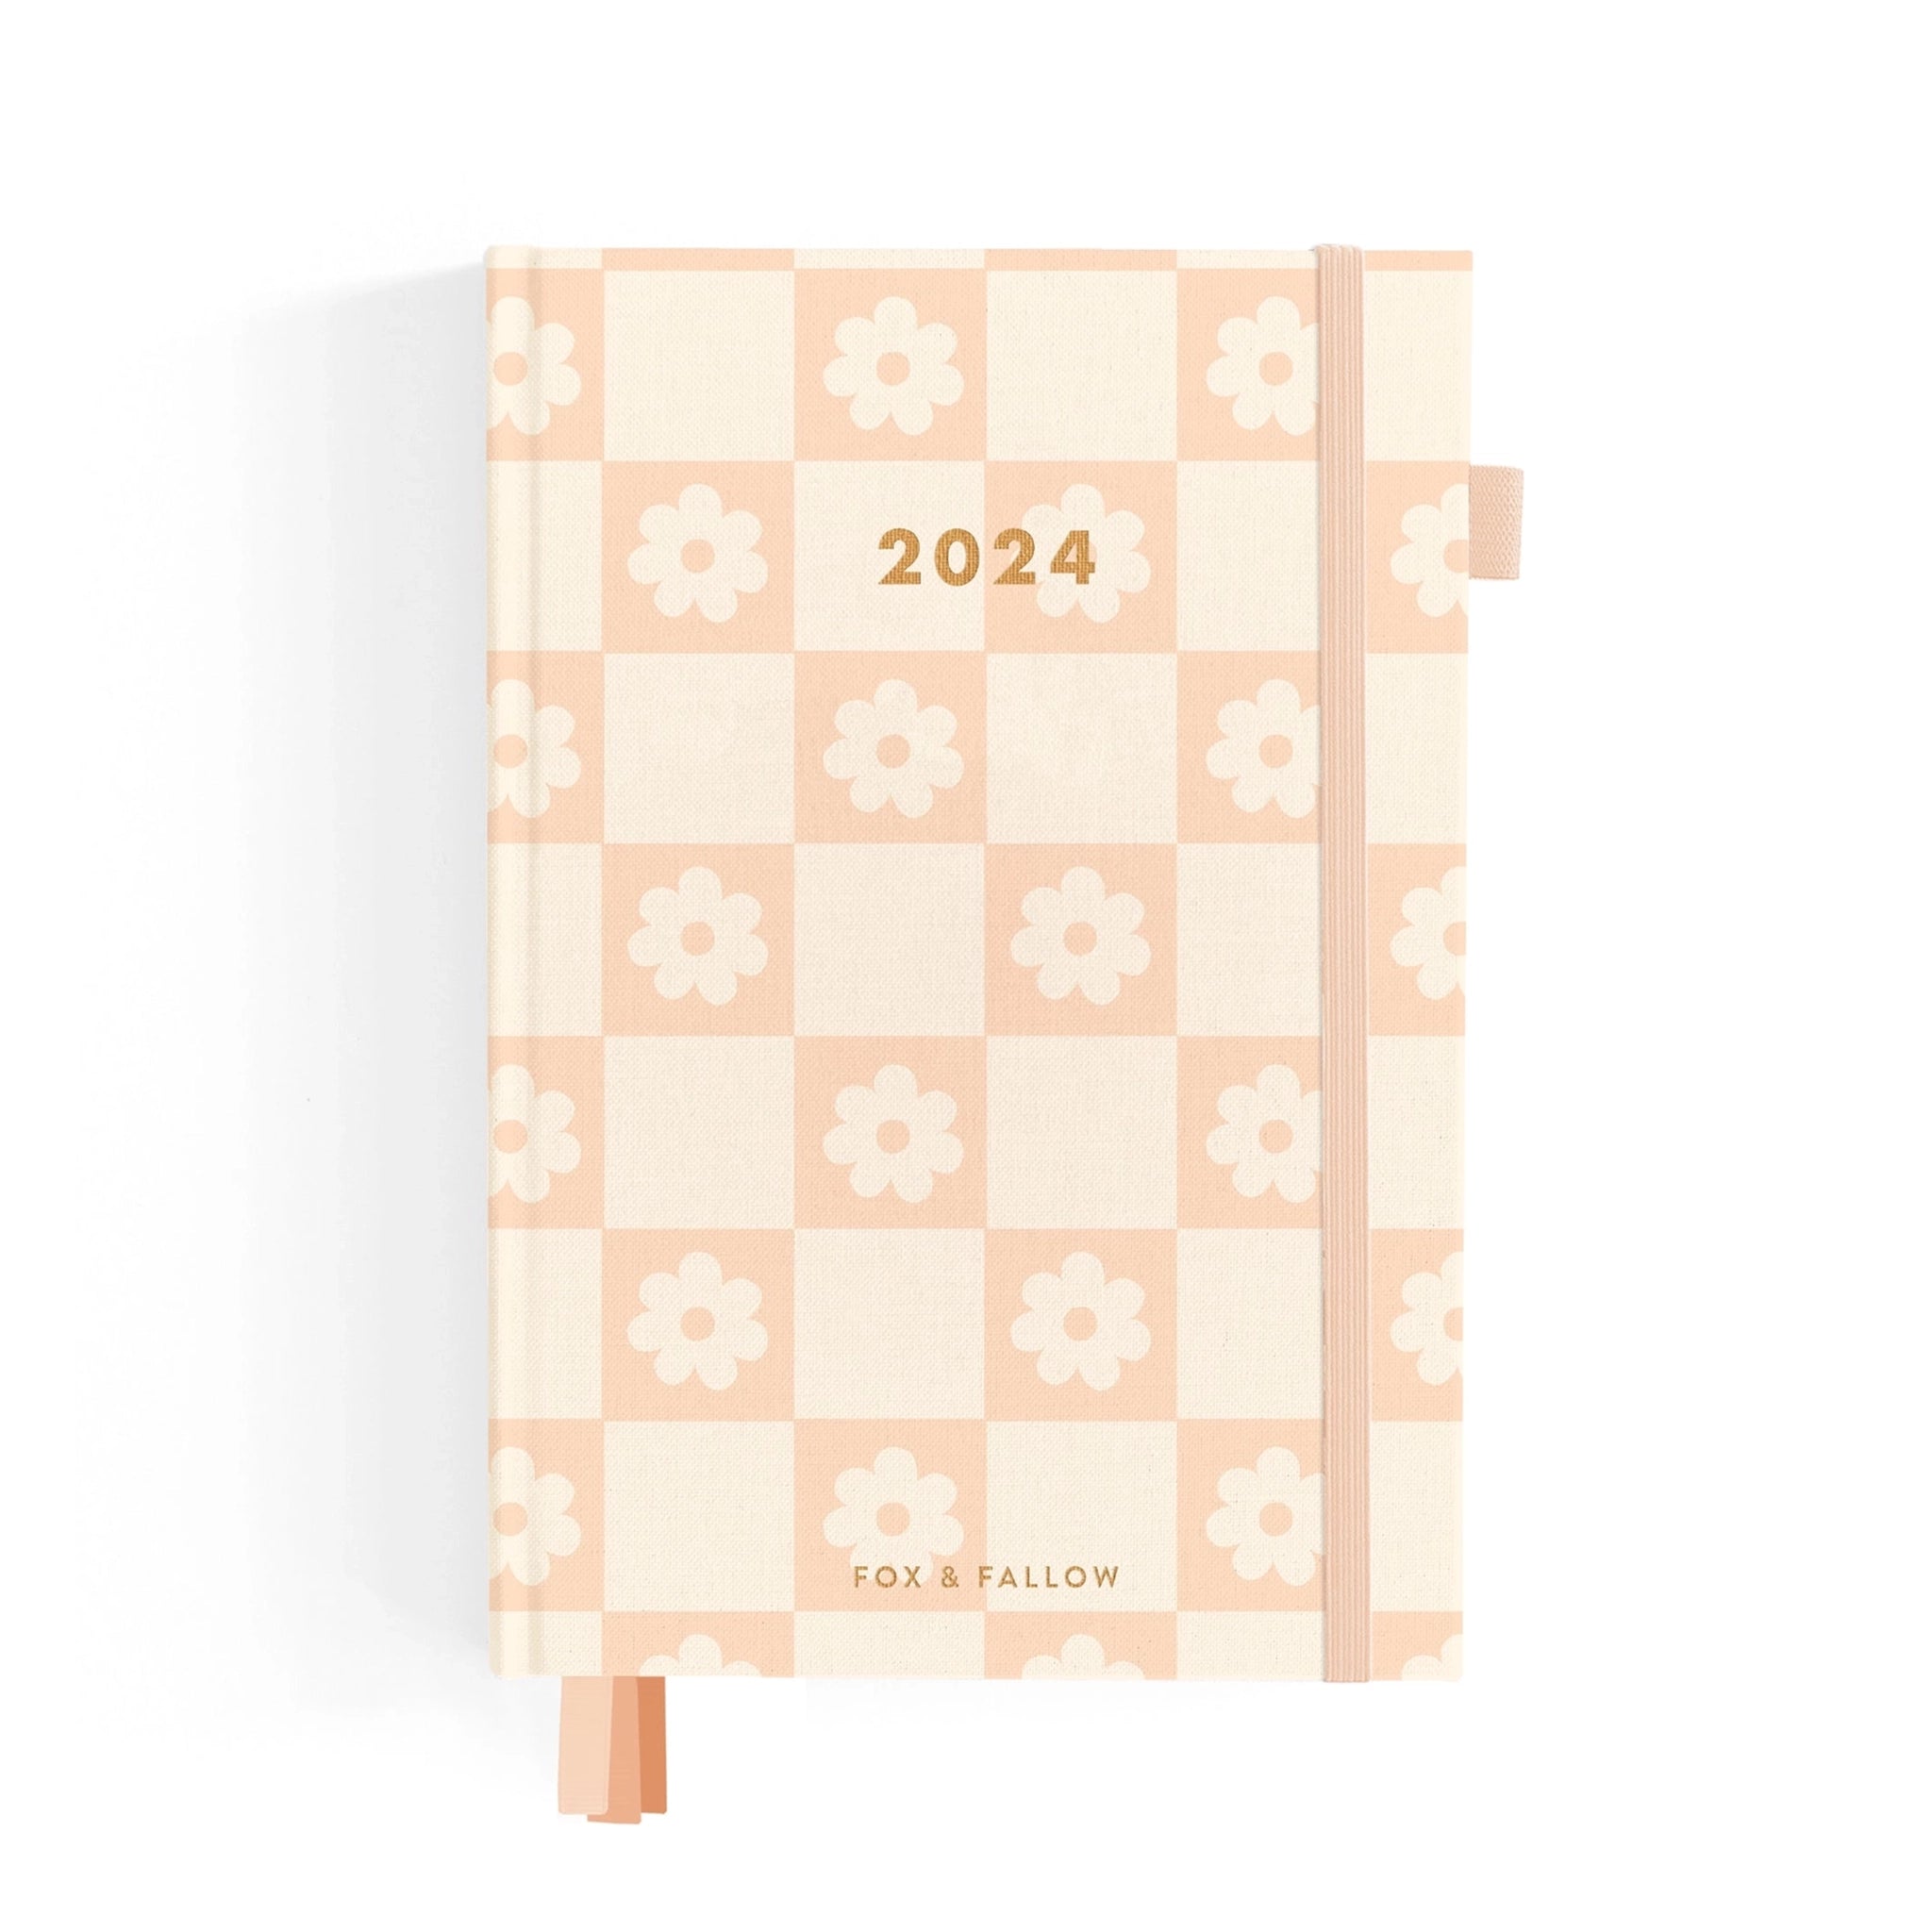 On a white background is a light pink and ivory checkered planner with gold foiled "2024" text in the center along with a light pink elastic loop for keeping shut. 